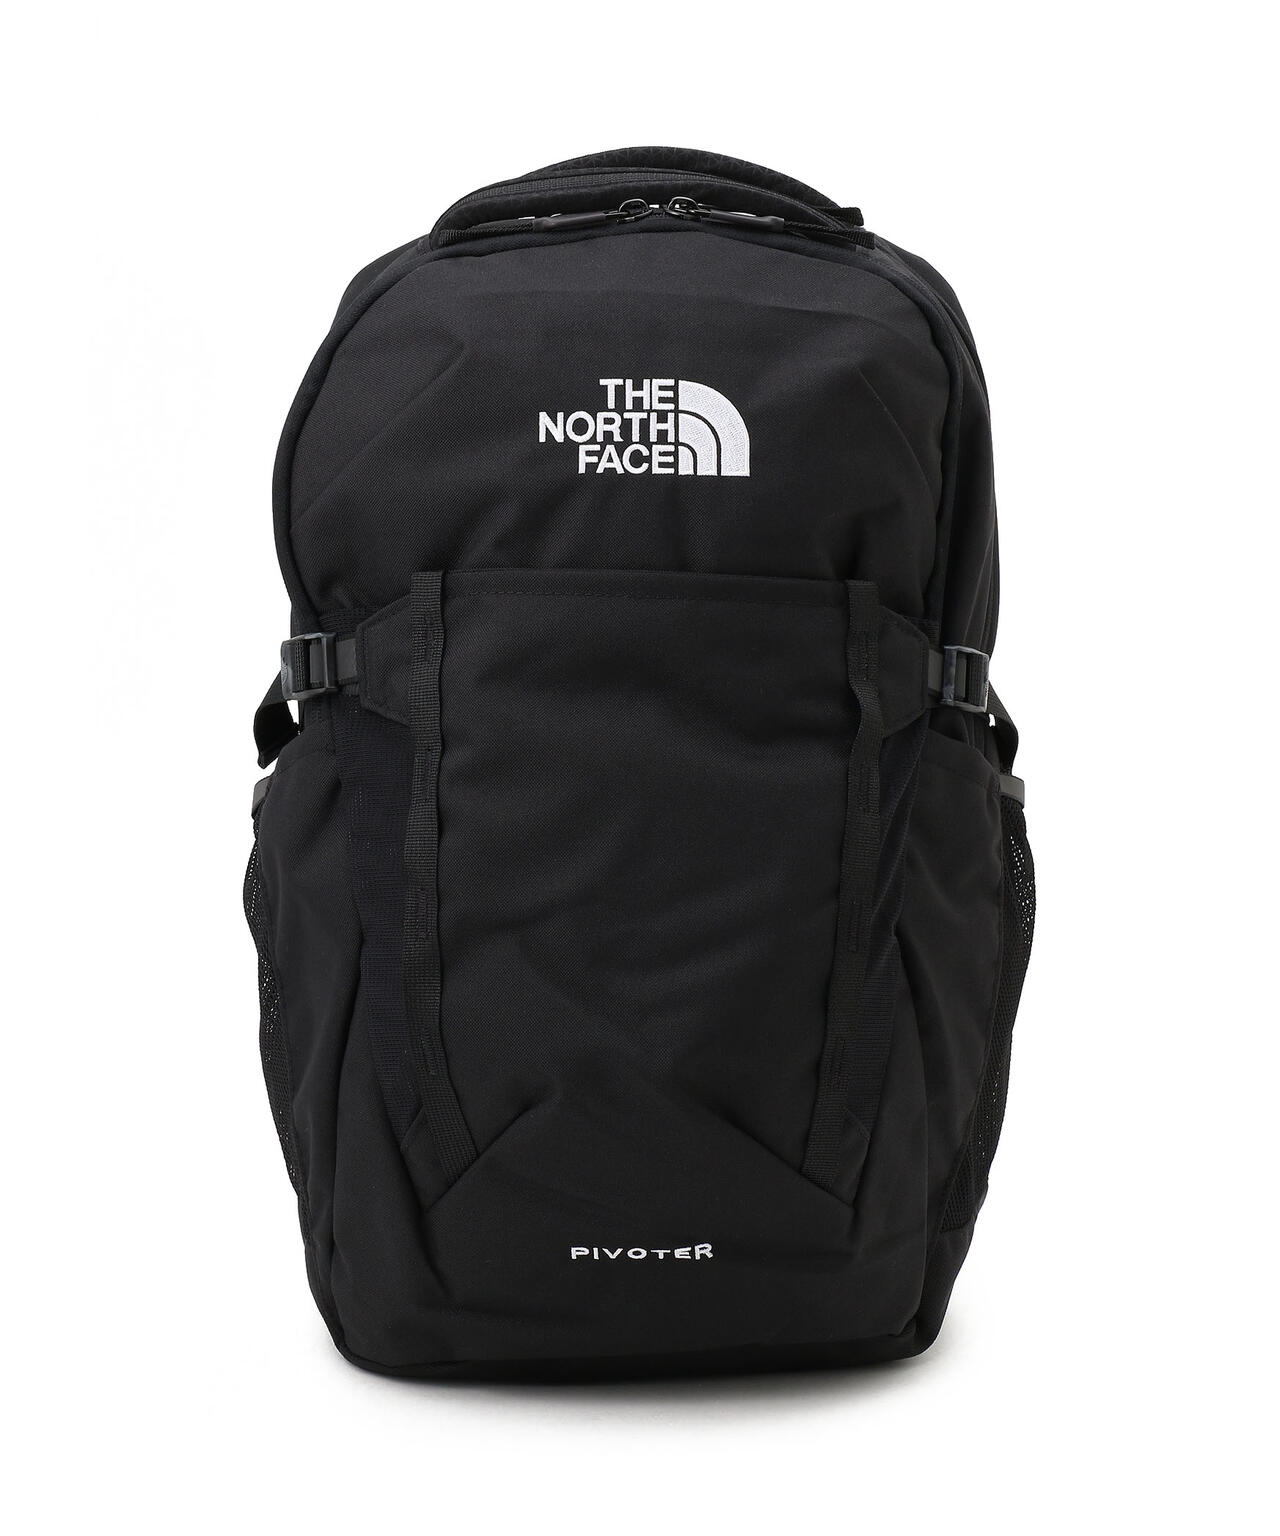 THE NORTH FACE/Pivoter/ピポター バックパック